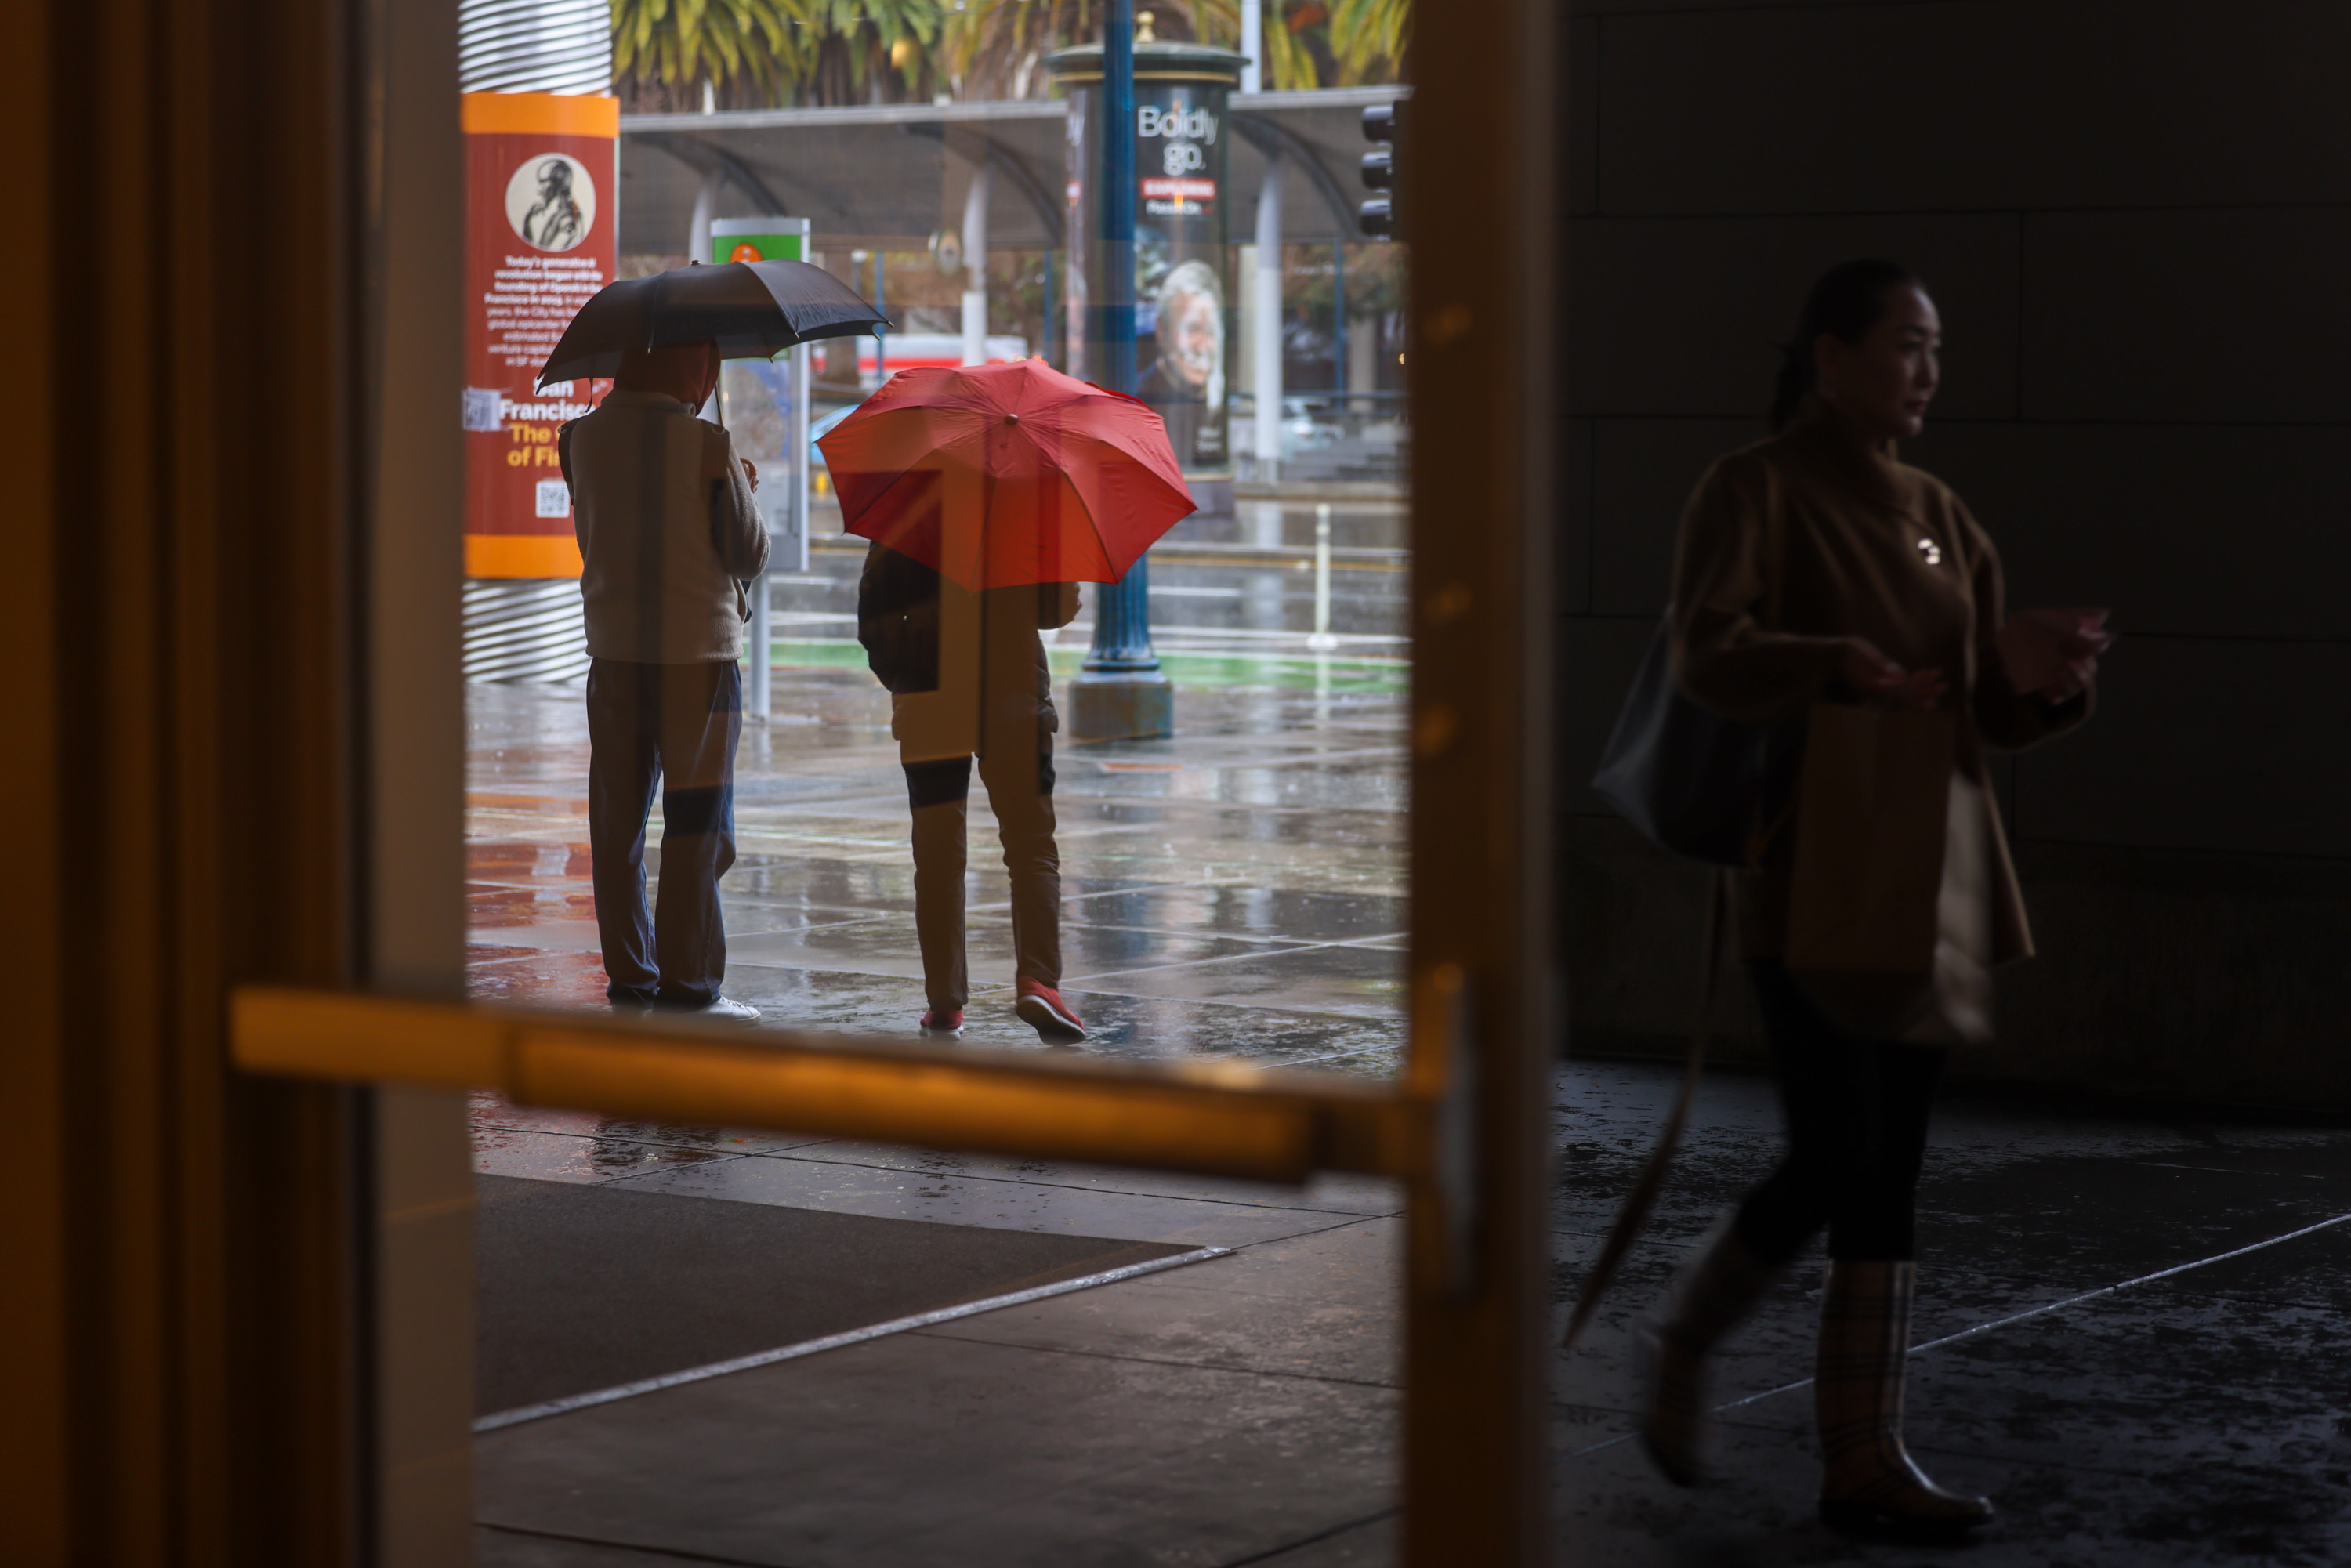 Two people stand on a sidewalk and hold umbrellas as they watch rain fall on a wet weather day.